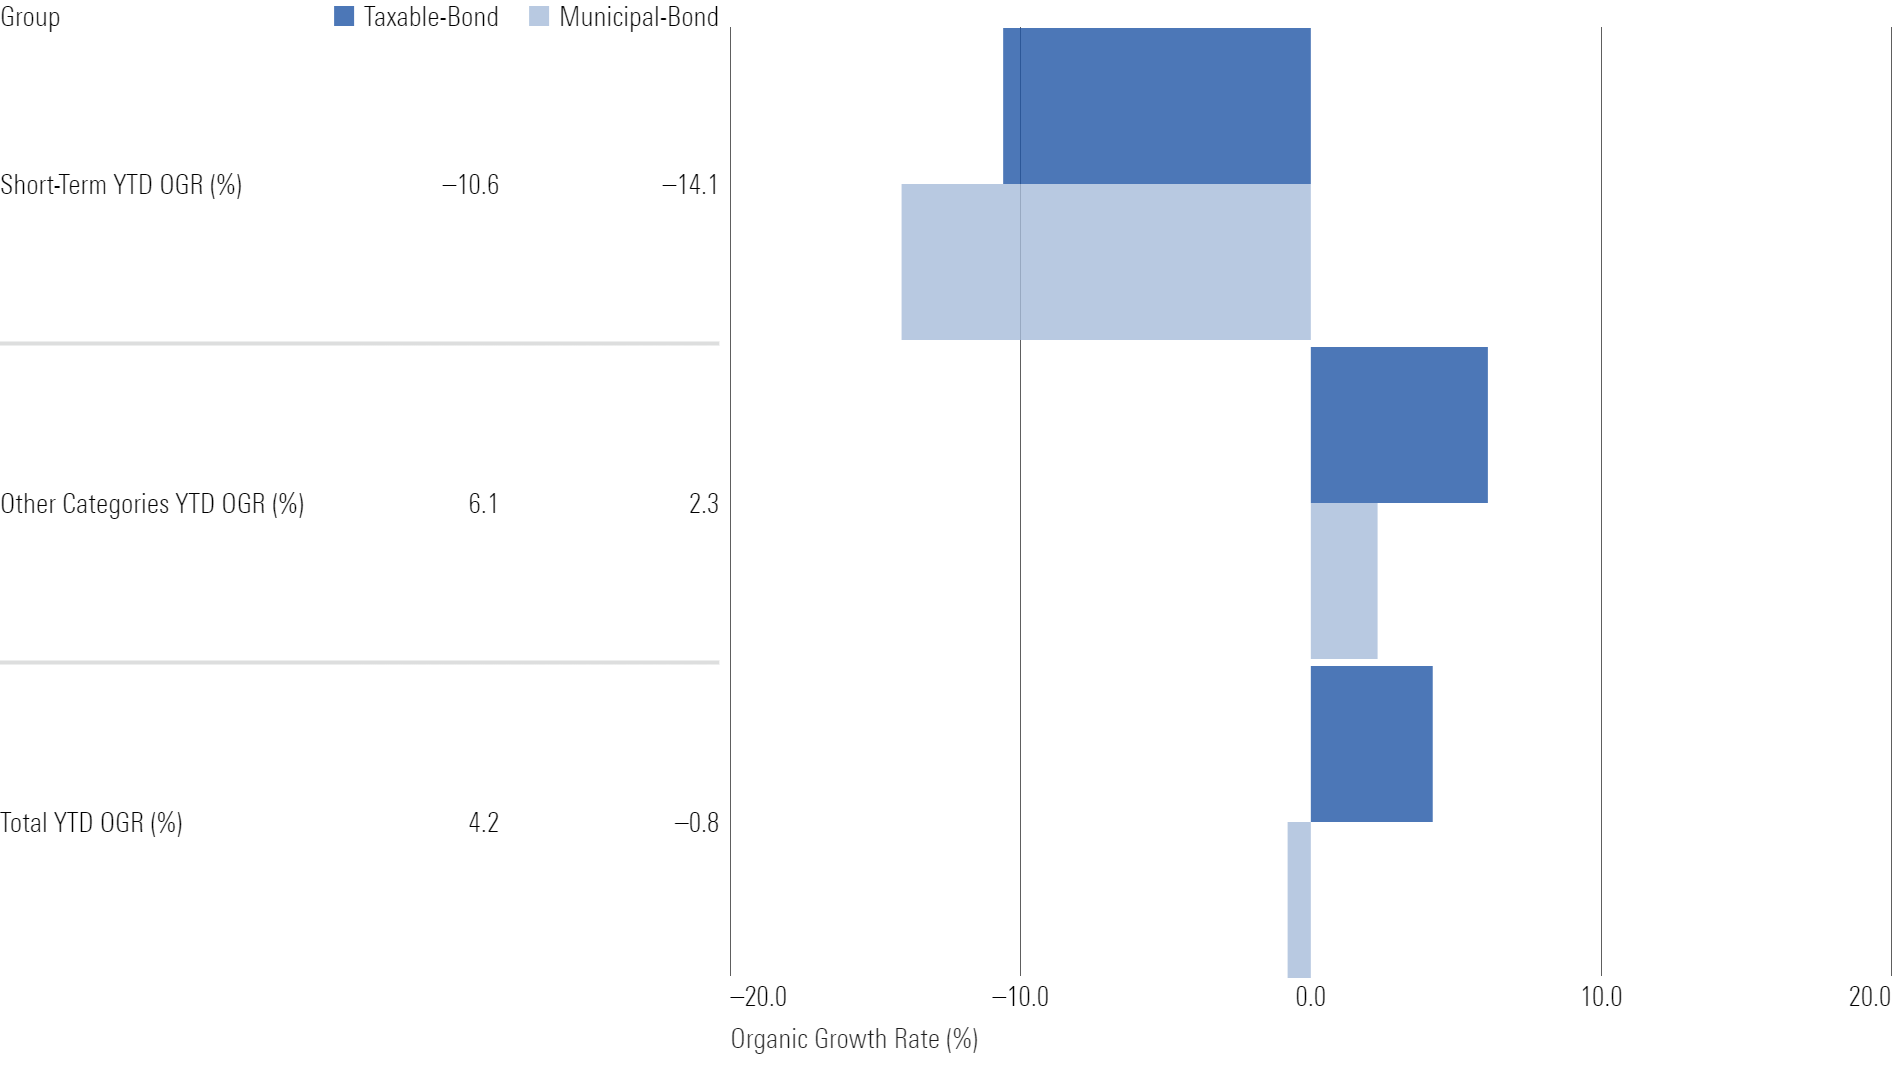 Horizontal bar chart of fixed-income fund organic growth rates.